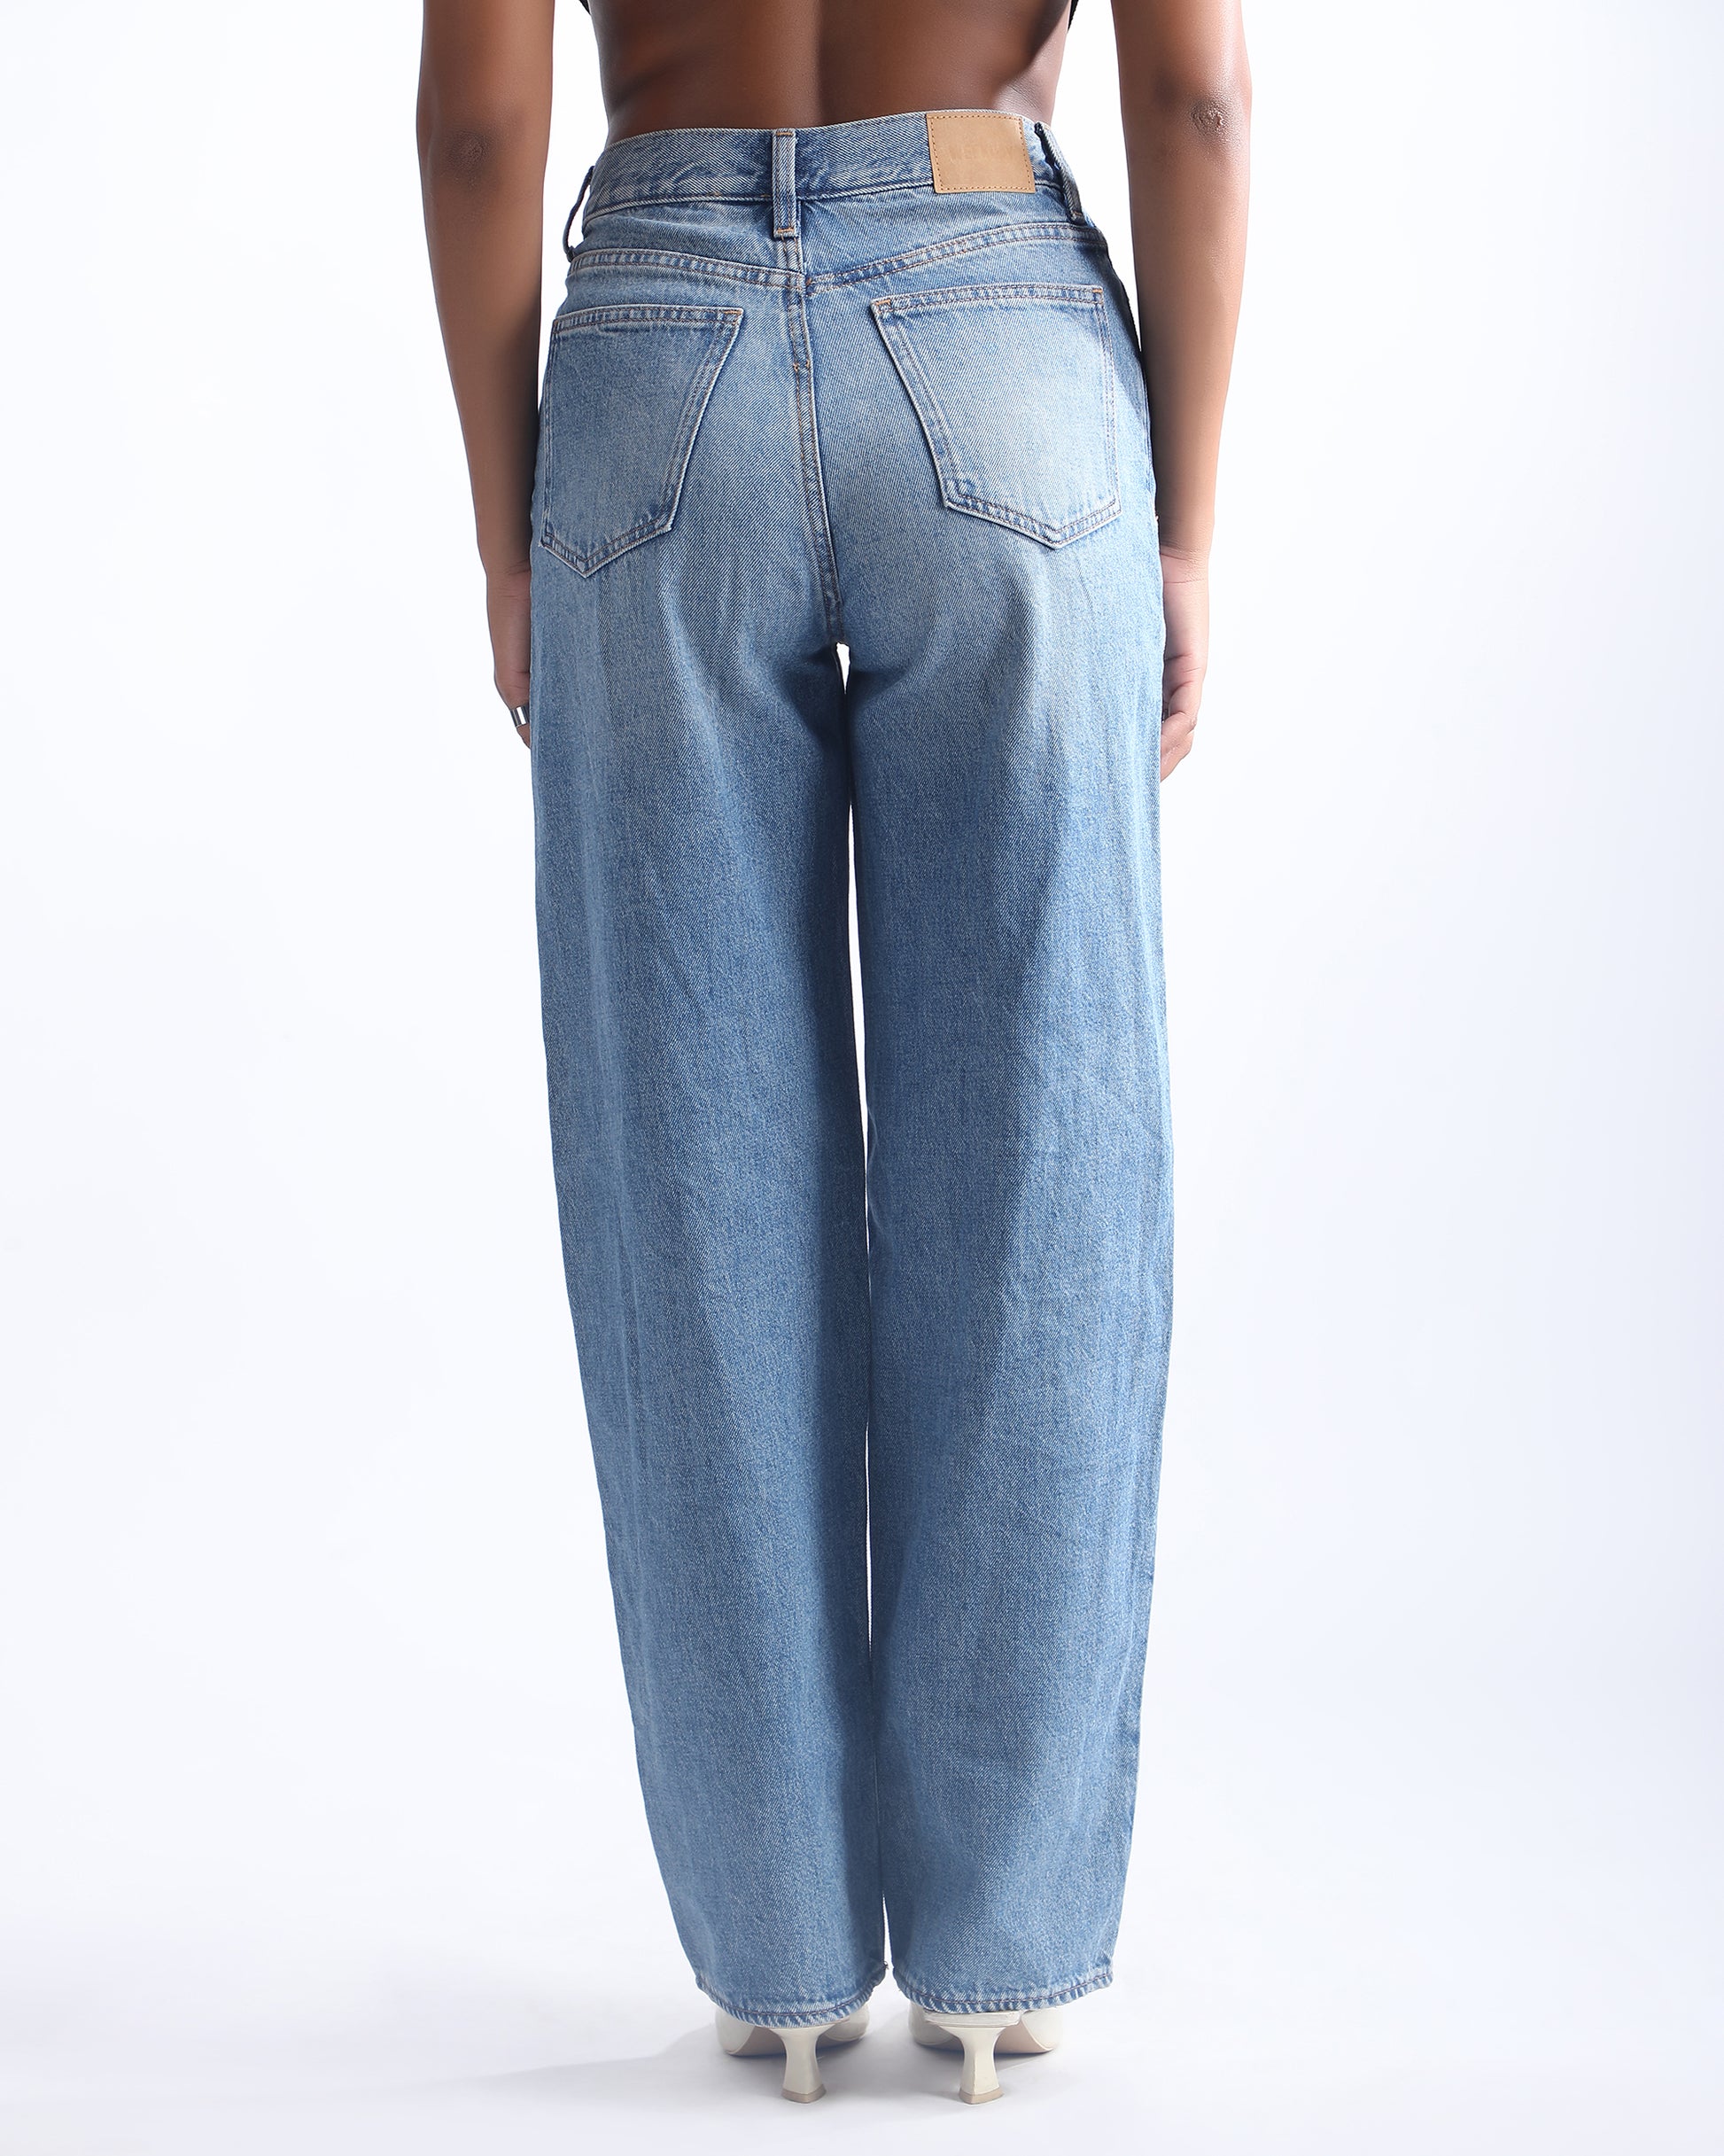 HIGH RISE MOM FIT JEANS,bottomwear, casual, denim, full length, high rise, jeans, light blue, mom fit, tapered, woven,straight-fit-whiskers-jeans-phase3,Length- Full lengthWaist- High riseFit- Mom FitColor- Ice Blue, SolidNo. of Pockets- 5Closure- Zip &amp; Button